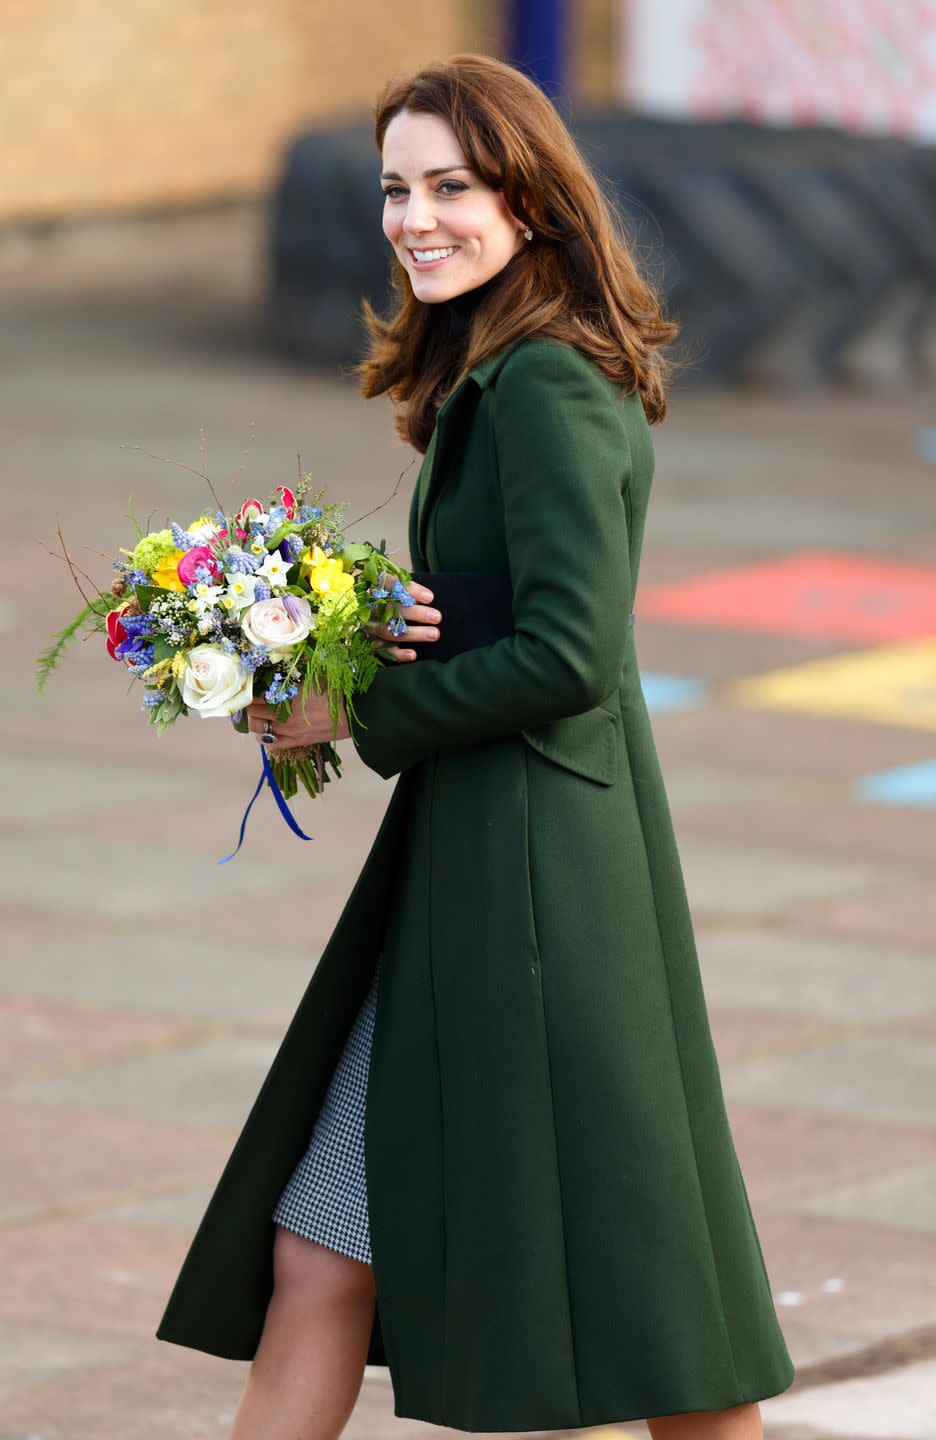 <p>Kate visited St. Catherine's Primary School in Edinburgh as part of her work with the charity Place2Be, of which she is a patron.</p>